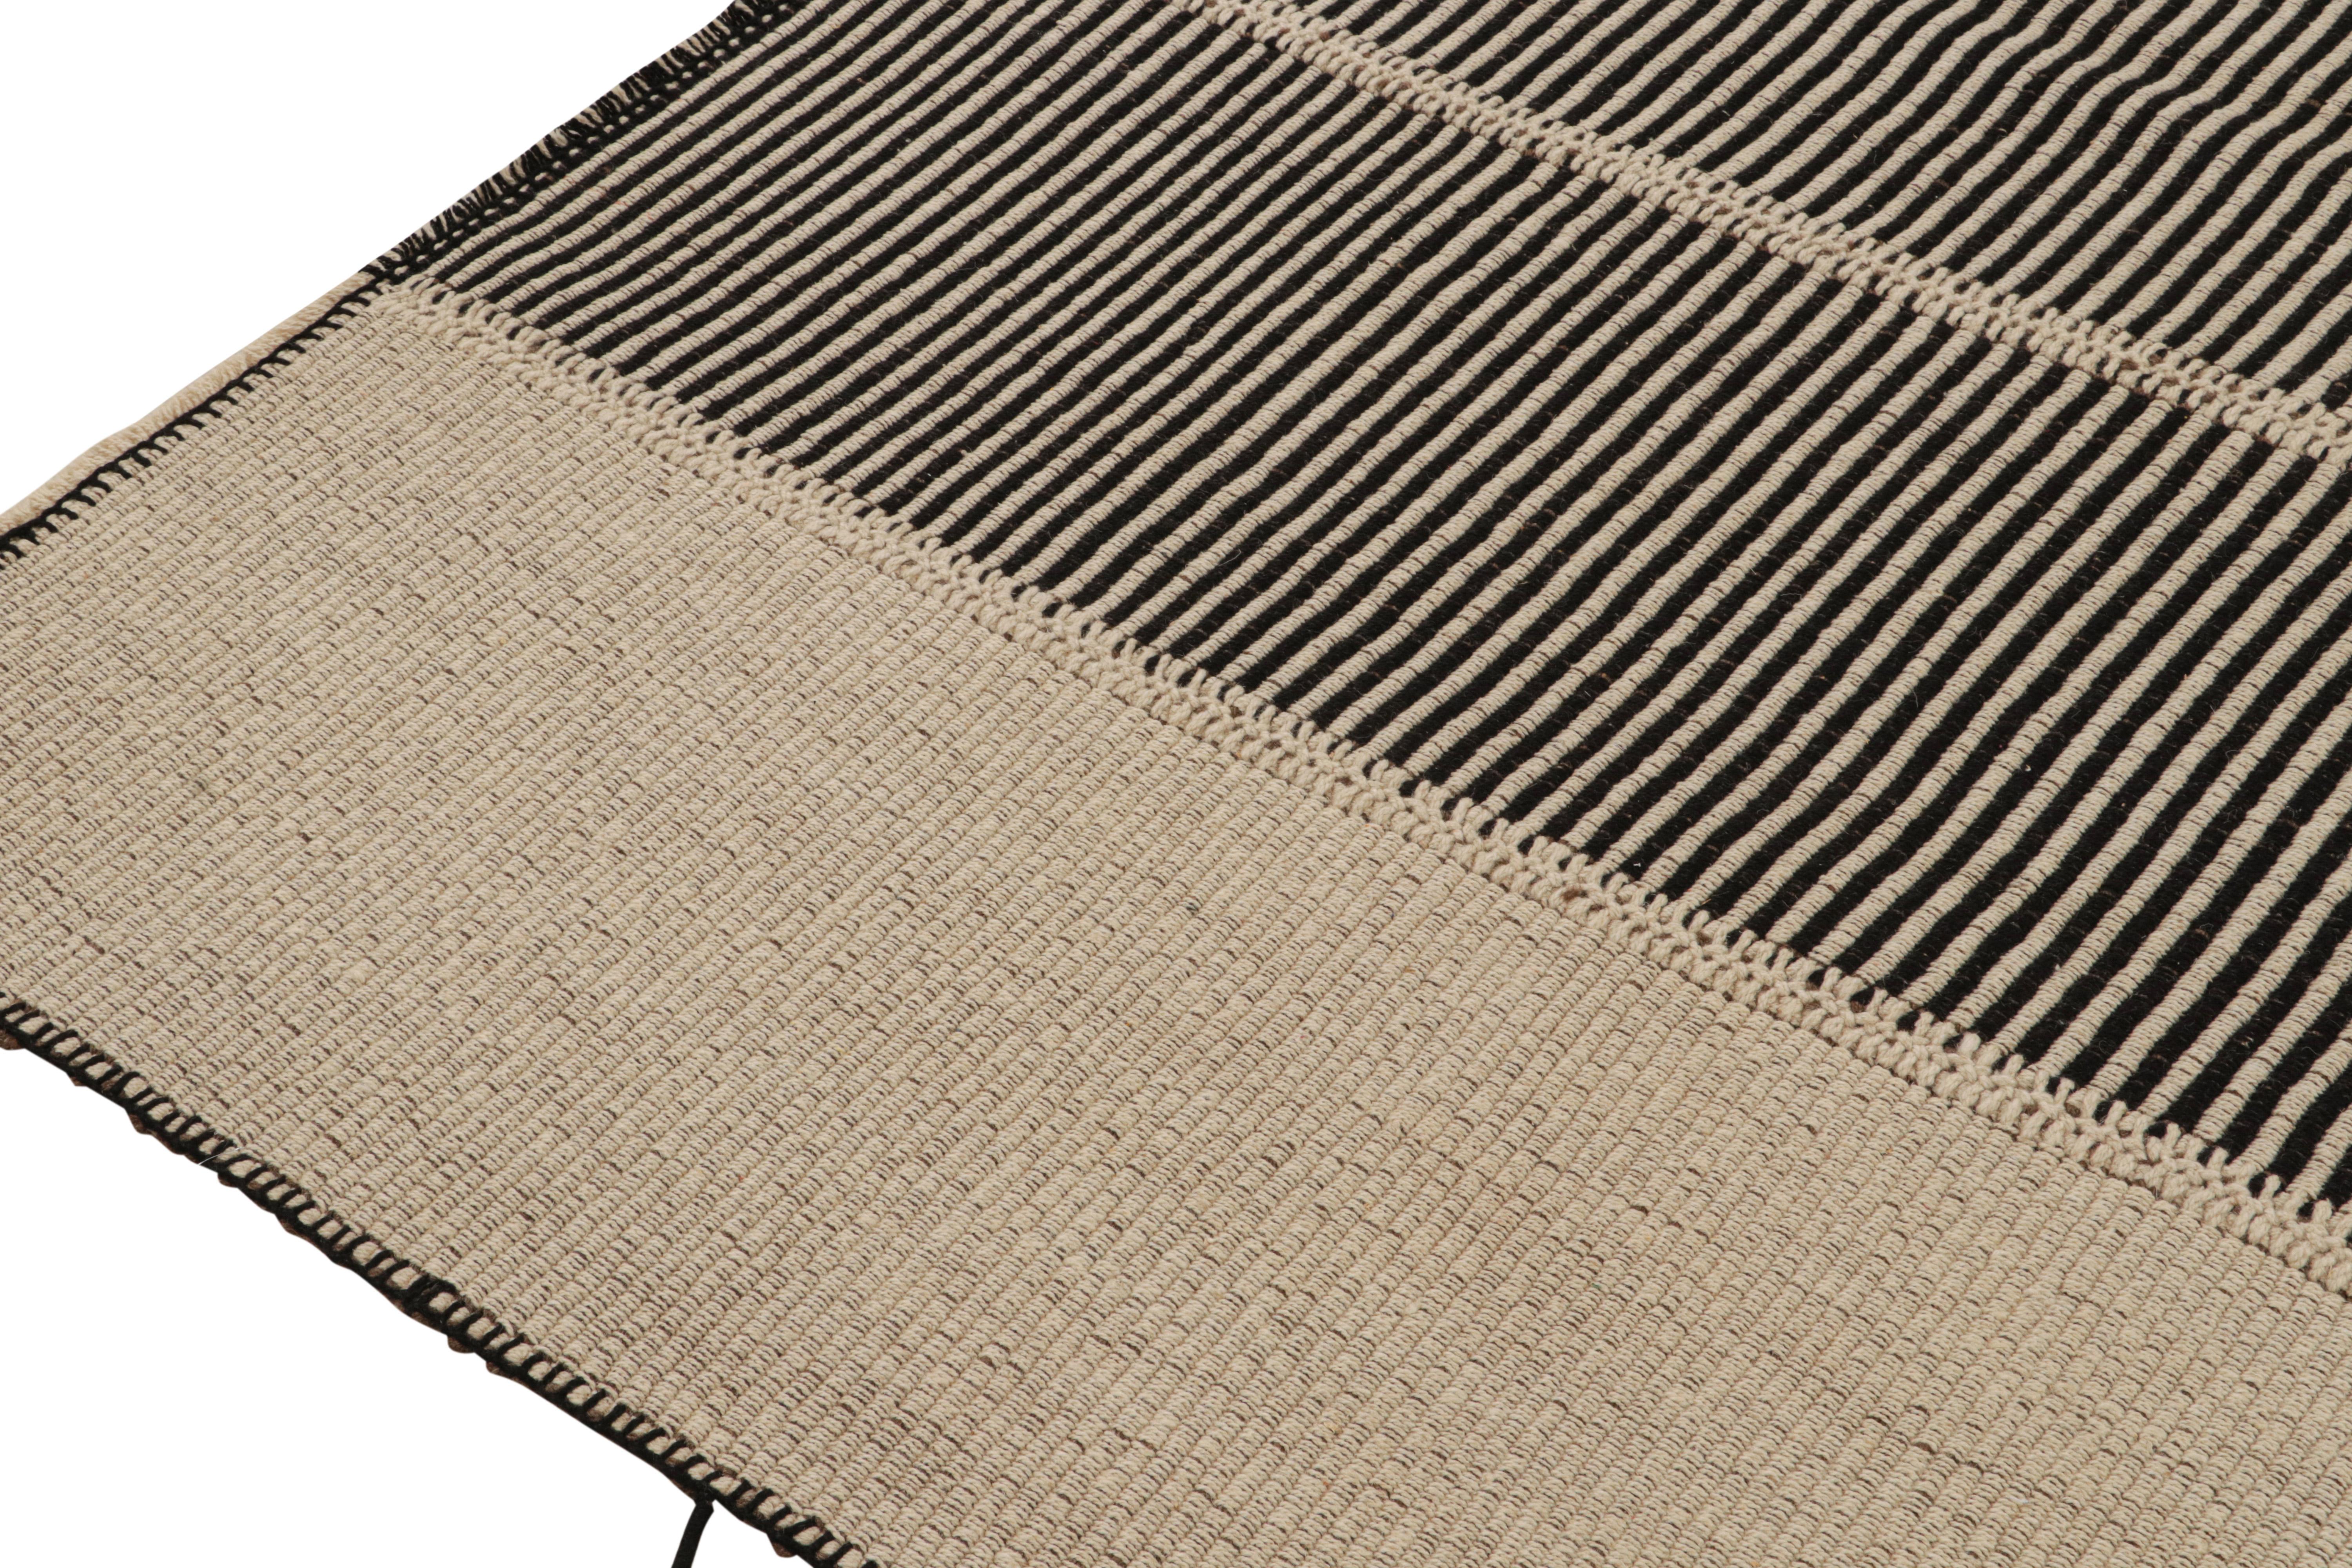 Rug & Kilim’s Contemporary Kilim in Black & Beige Stripes with Brown Accents In New Condition For Sale In Long Island City, NY